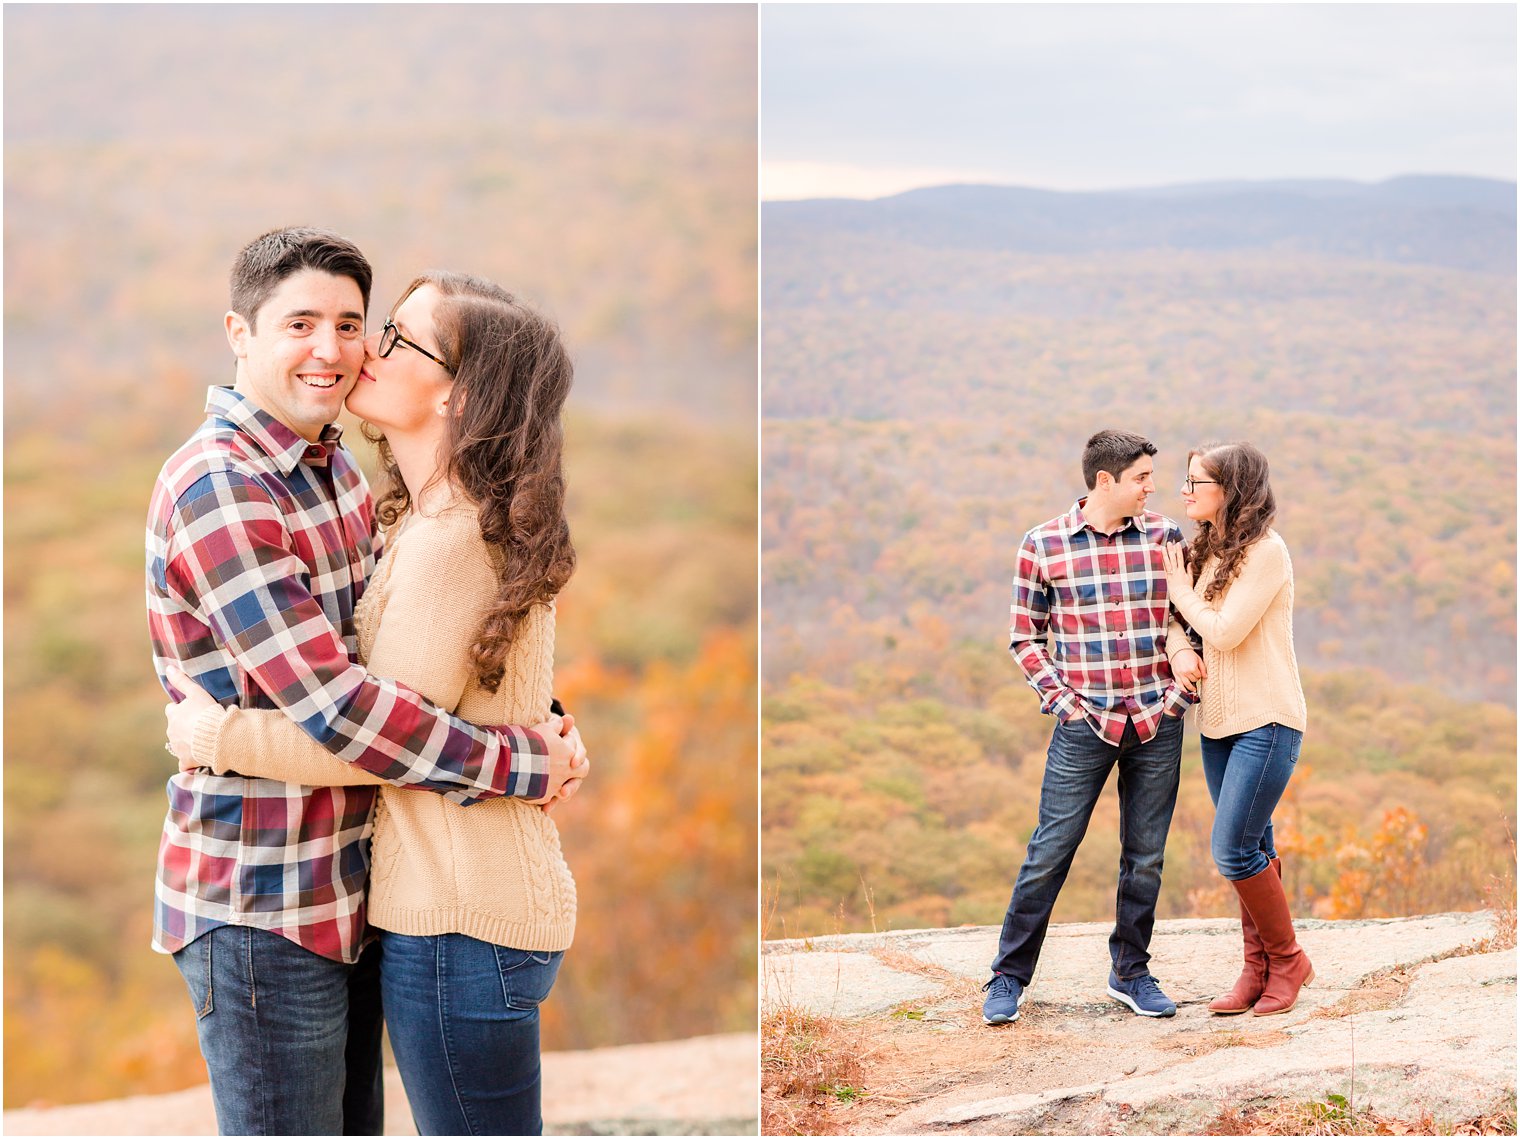 Mountaintop engagement session by Idalia Photography